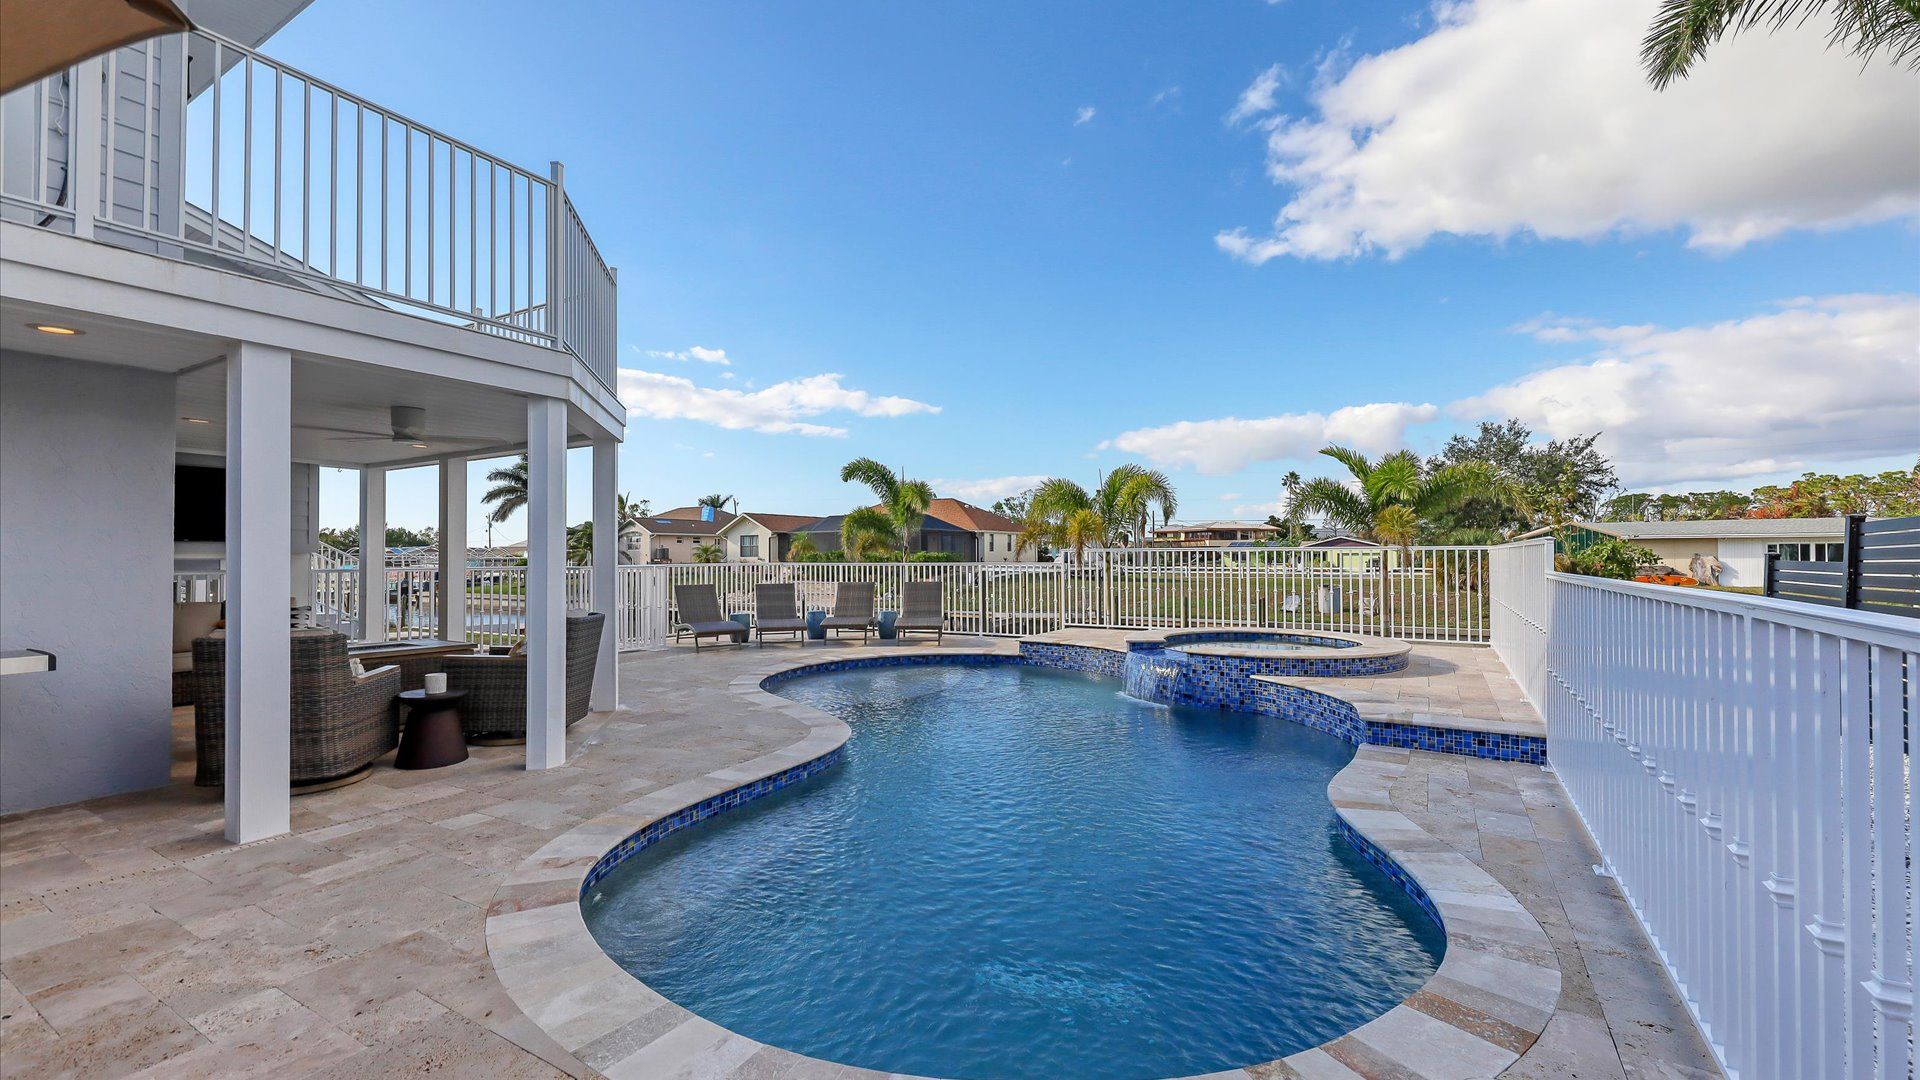 Incredible pool/spa on the pool deck overlooking the canal leading to Lemon Bay